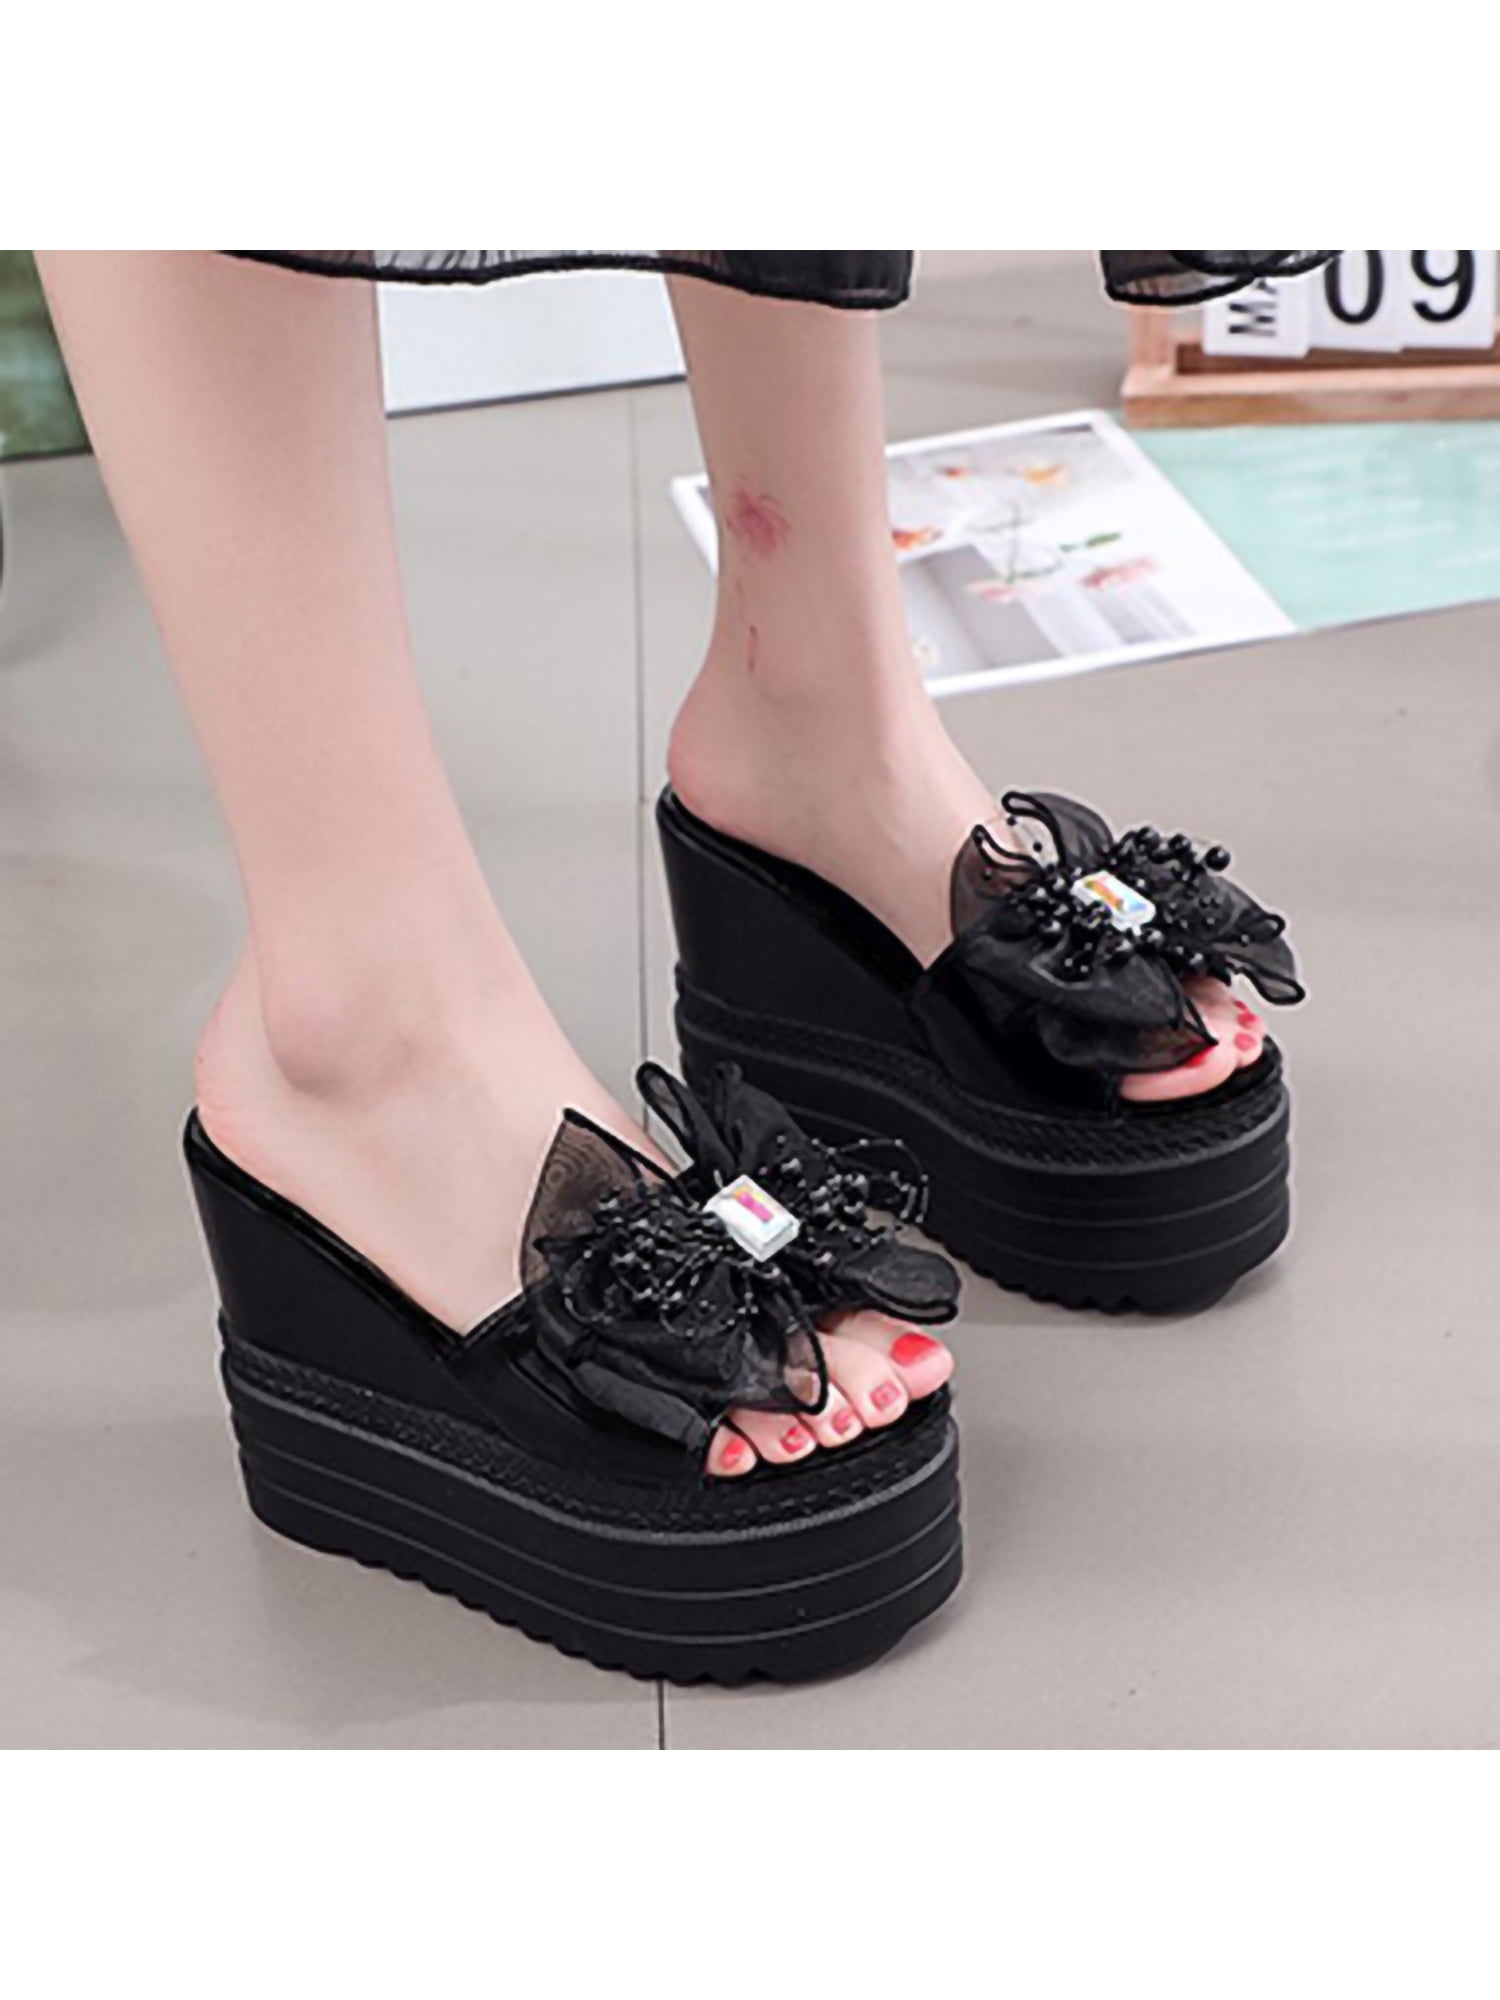 Korean Women's Leather Platform Pumps Wedge Heel Pull On Breathable Shoes Casual 